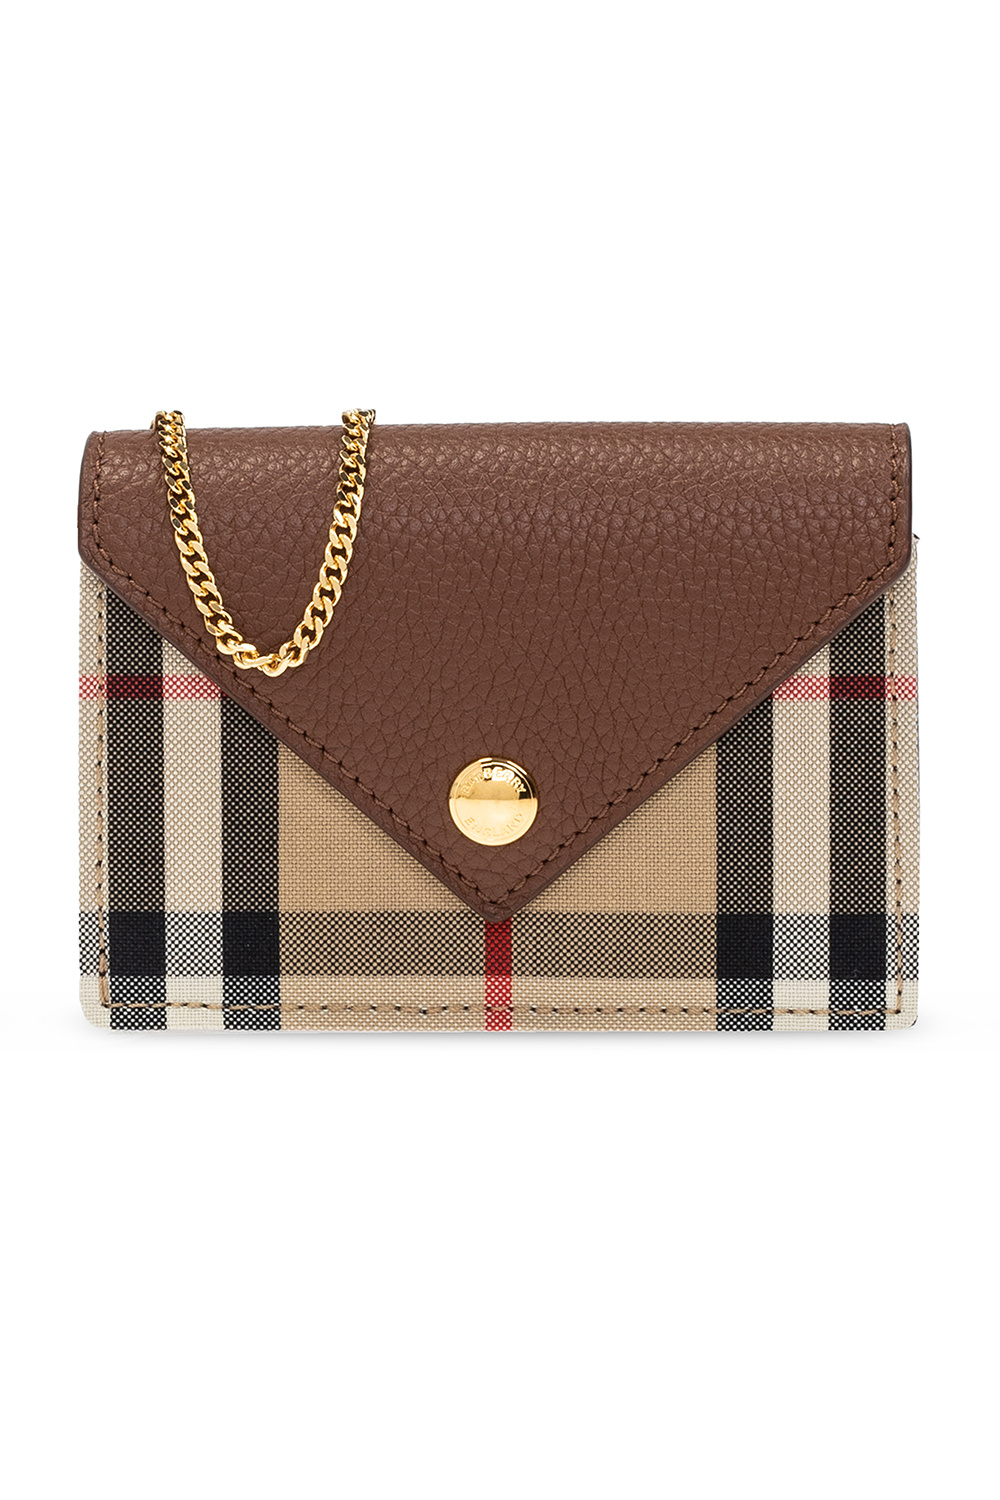 Burberry ‘House Check’ card case